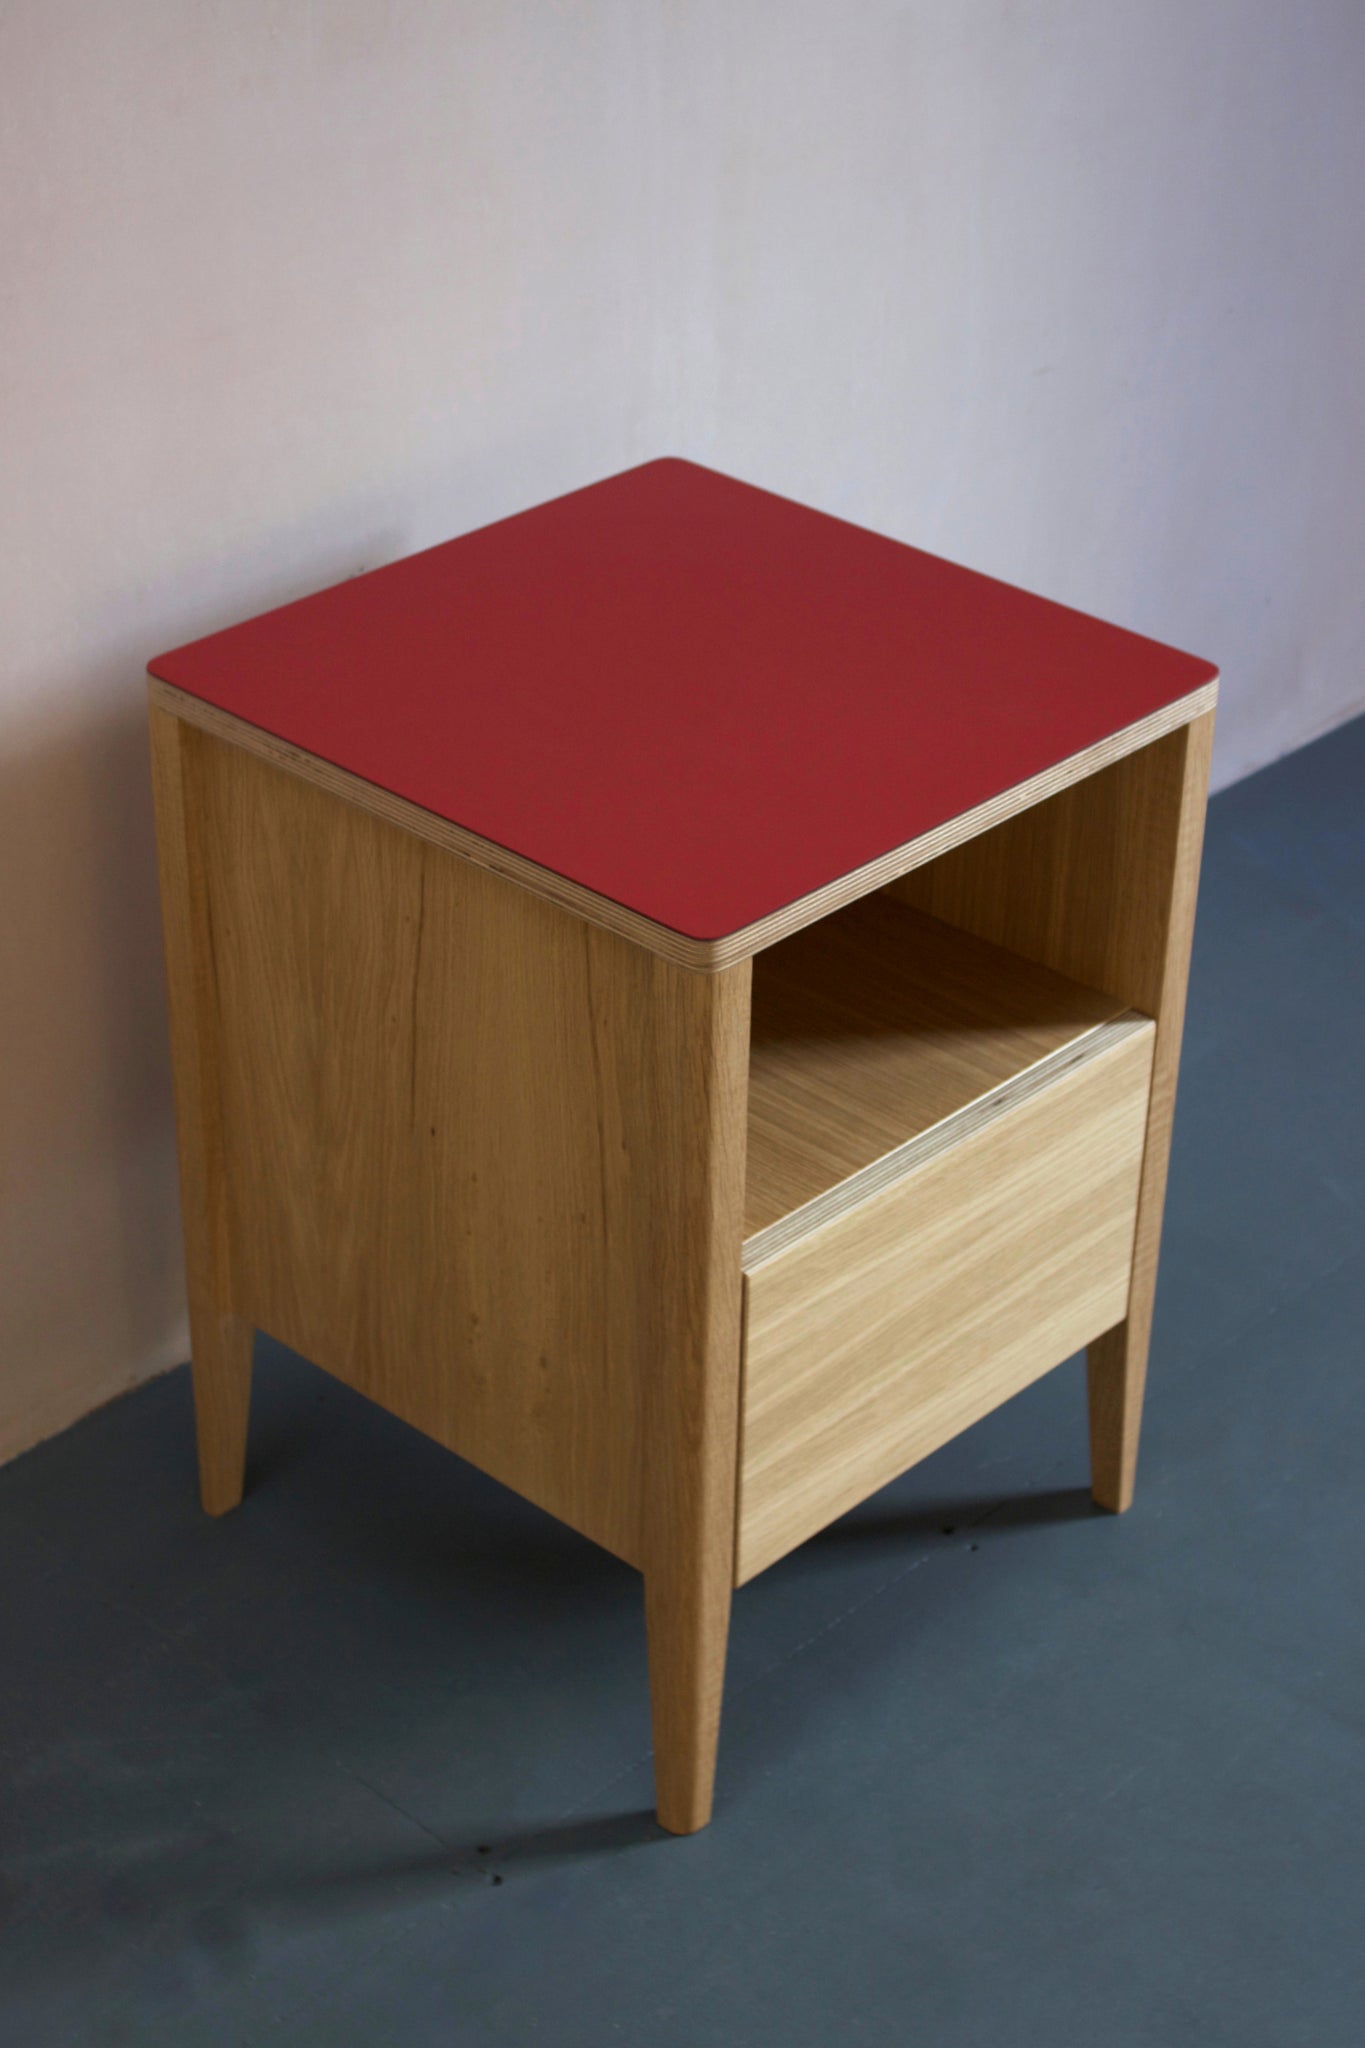 Handmade bedside table, perfect for a modern home. It features Forbo linoleum top with oak veneered plywood carcasses and solid oak legs. Designed & made by Jon Grant London in Leyton, East London.